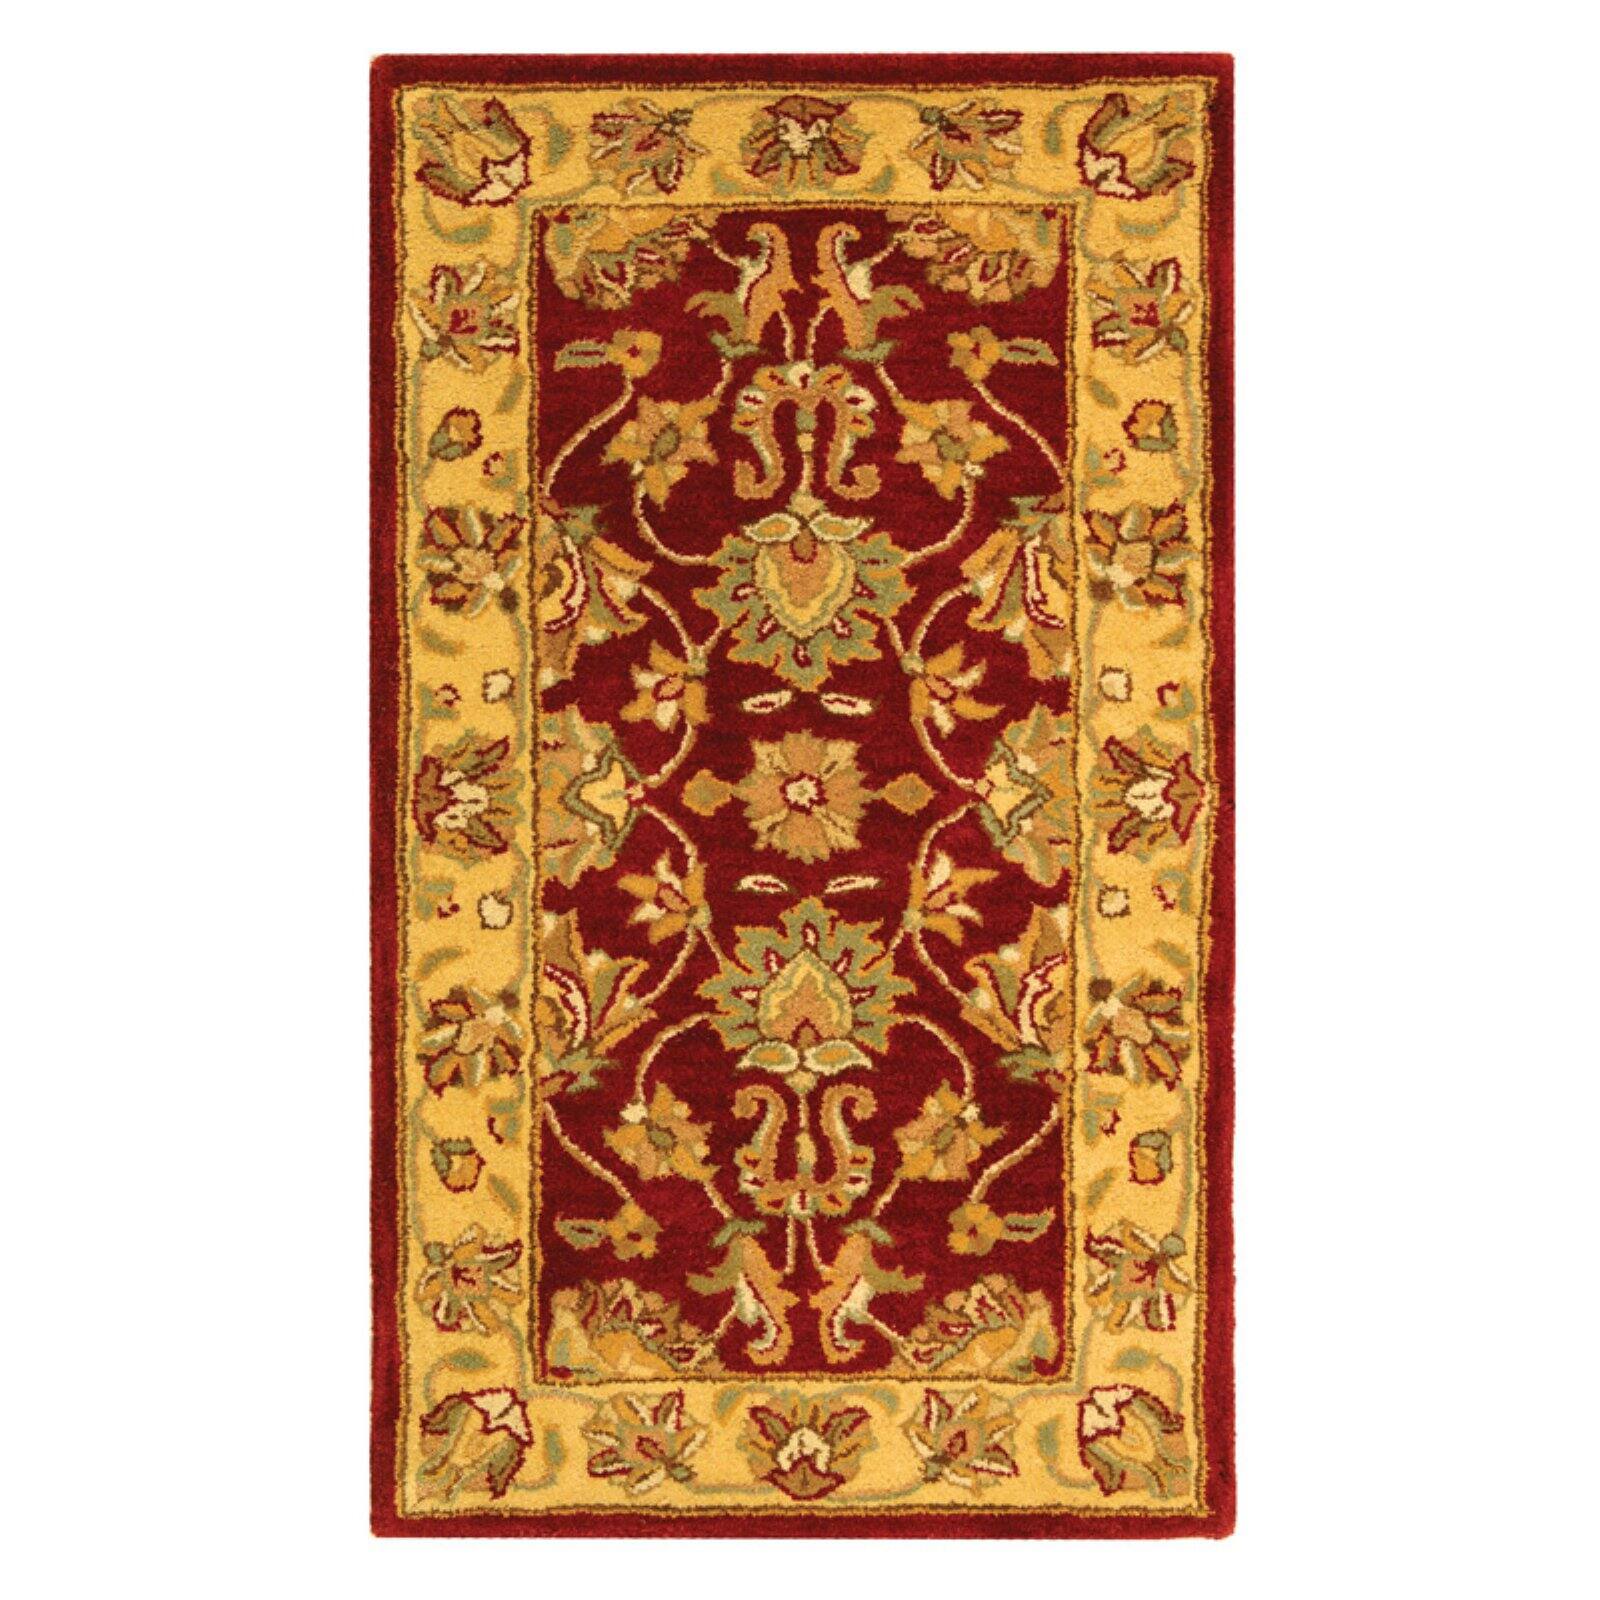 SAFAVIEH Heritage Regis Traditional Wool Area Rug, Red/Gold, 2'3" x 4' - image 2 of 9